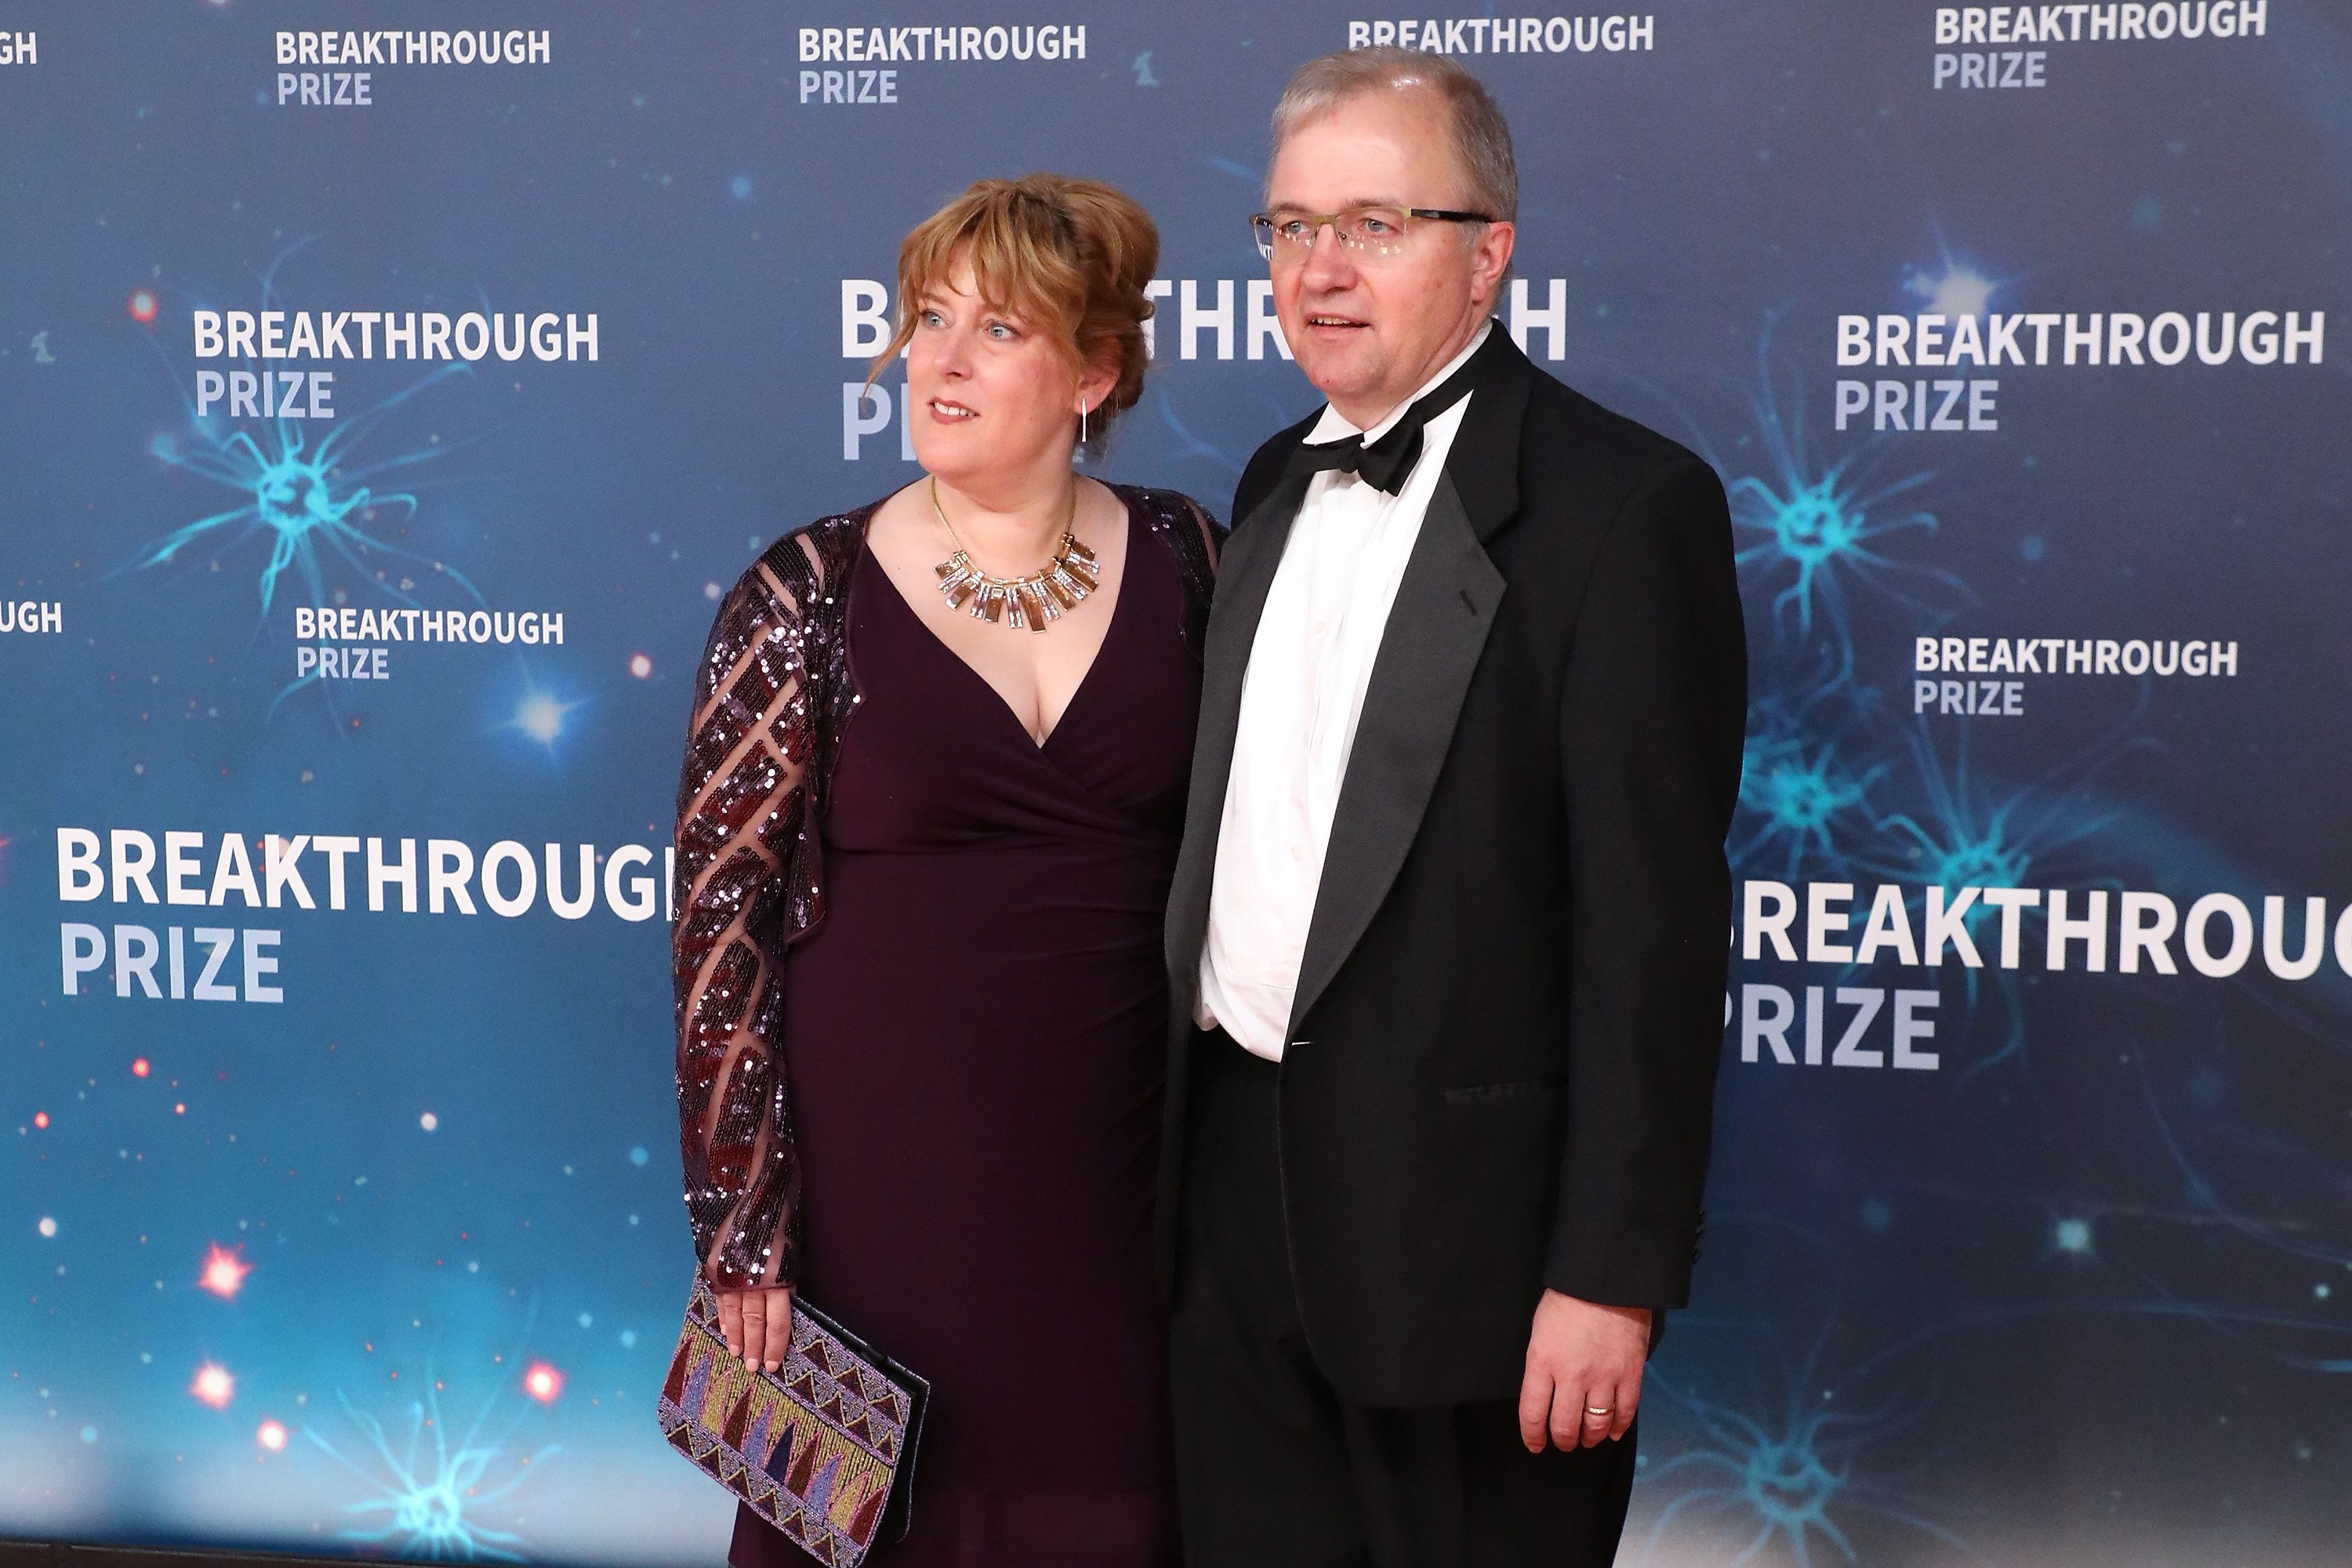 Katrina and Robert Hawking pose at the 2020 Breakthrough Prize Red Carpet at NASA Ames Research Center on November 3, 2019, in Mountain View | Source: Getty Images